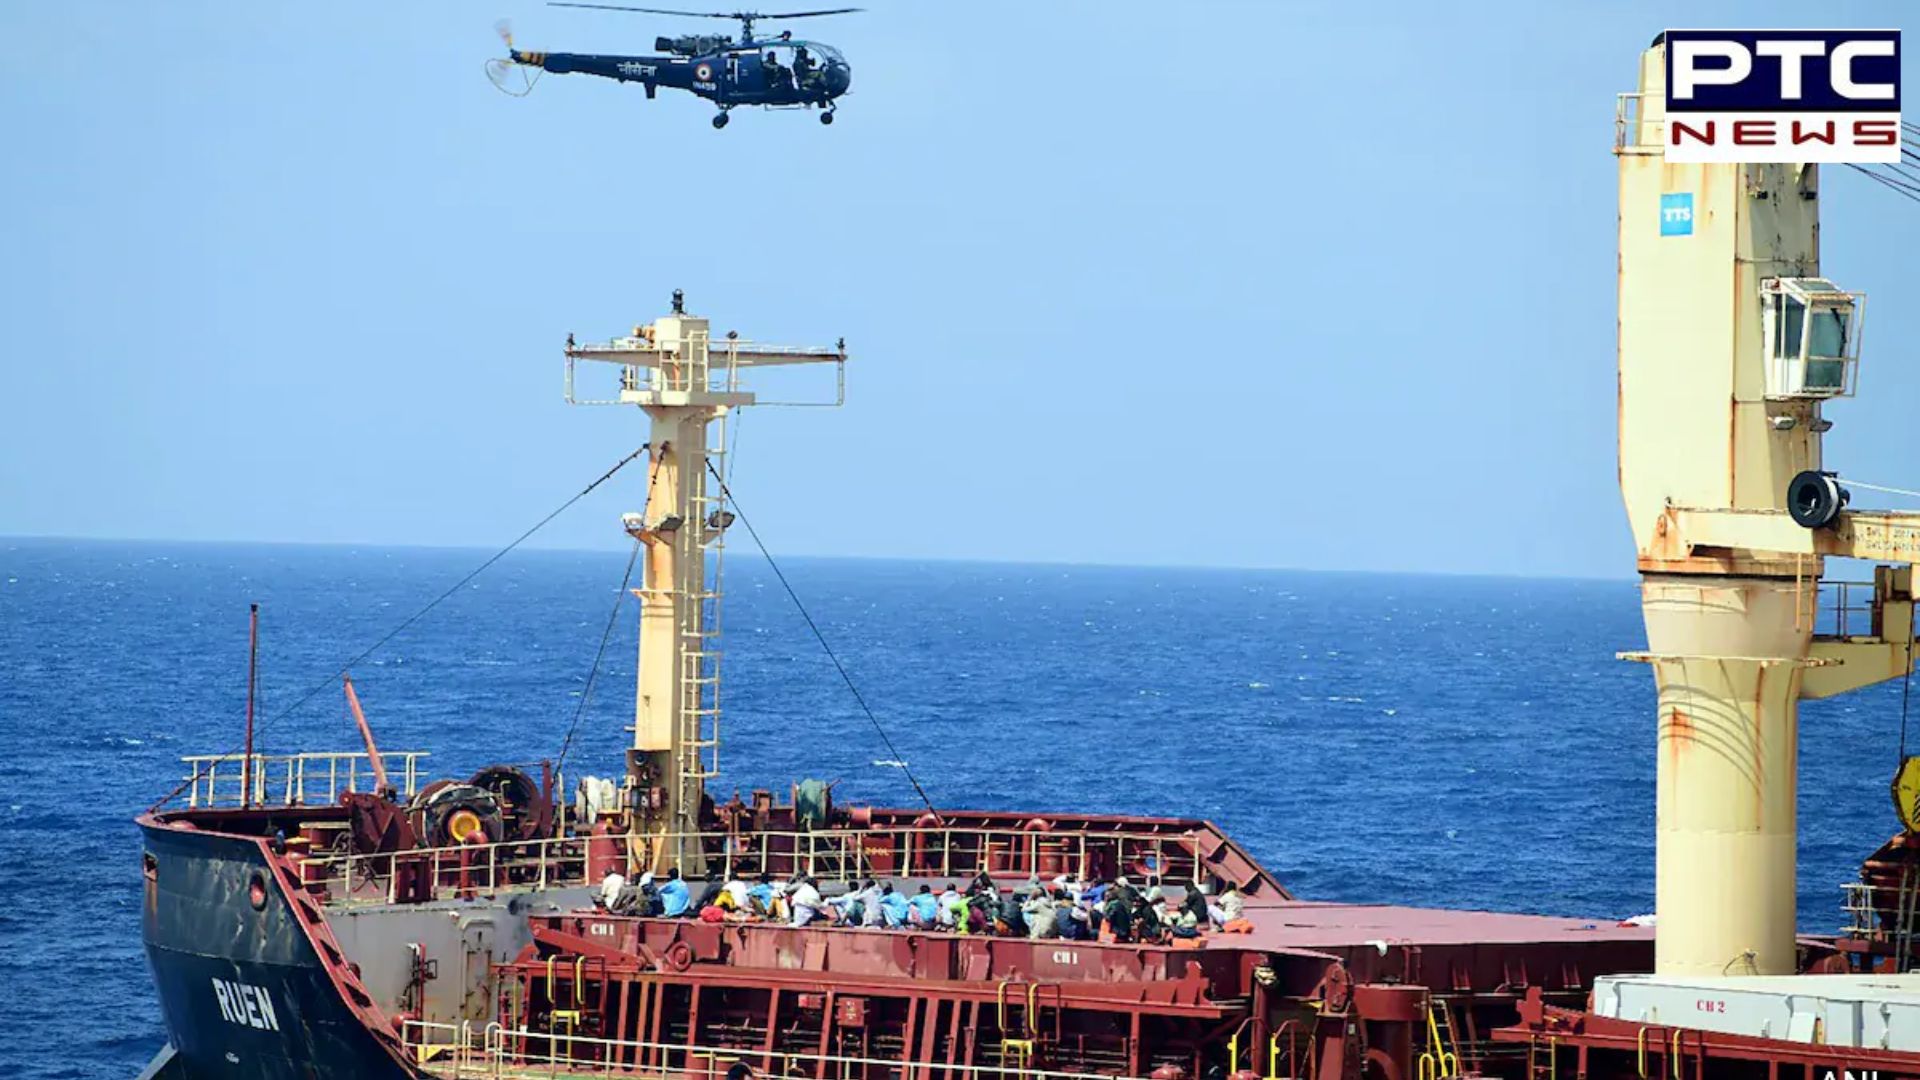 Indian Navy's bold Red Sea missions: Confronting pirates in the Arabian waters